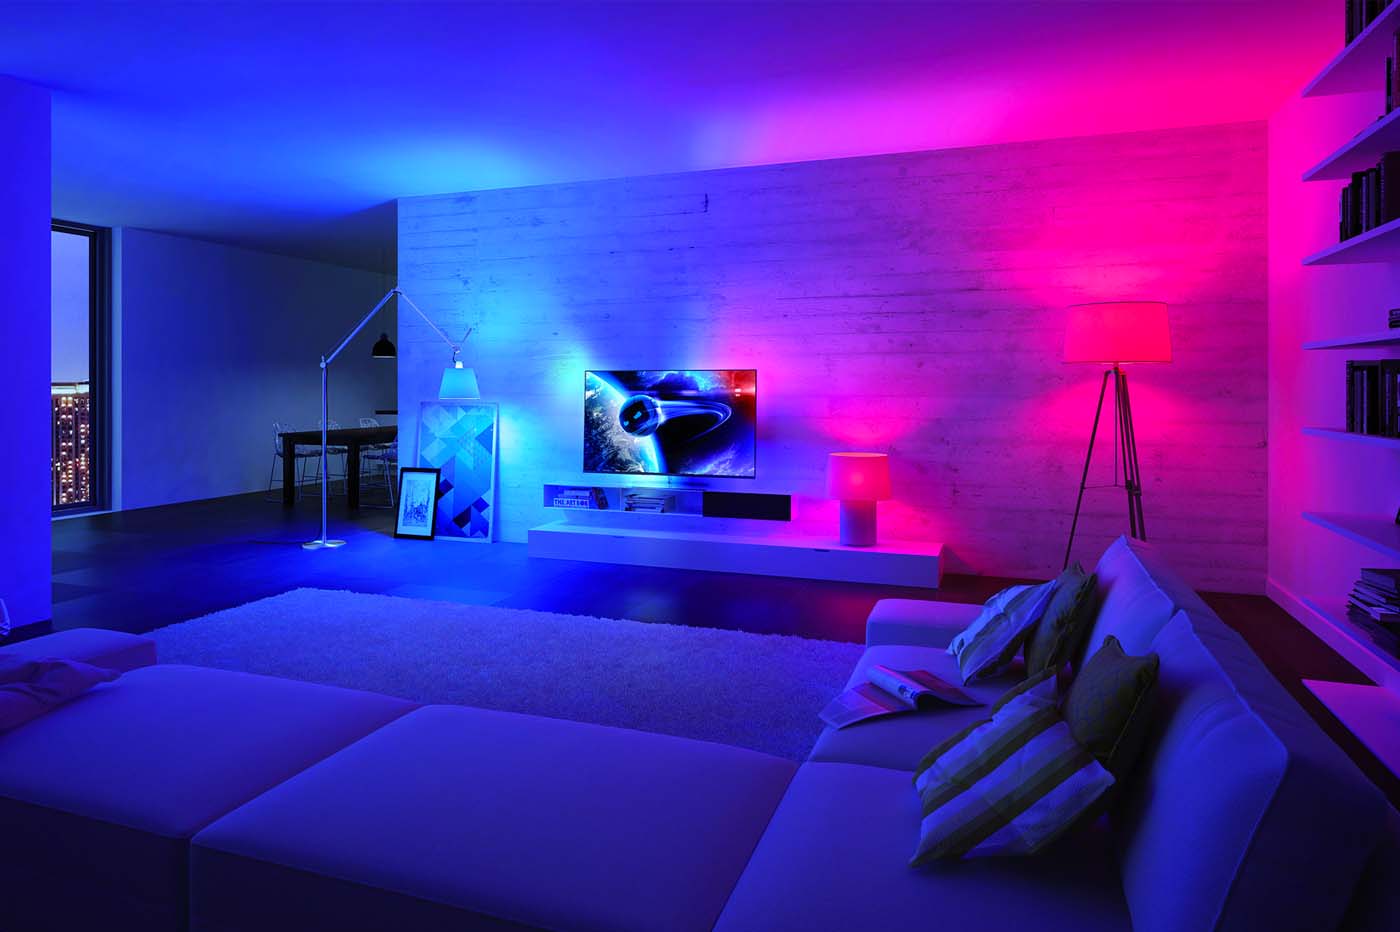 Ampoules Philips Hue